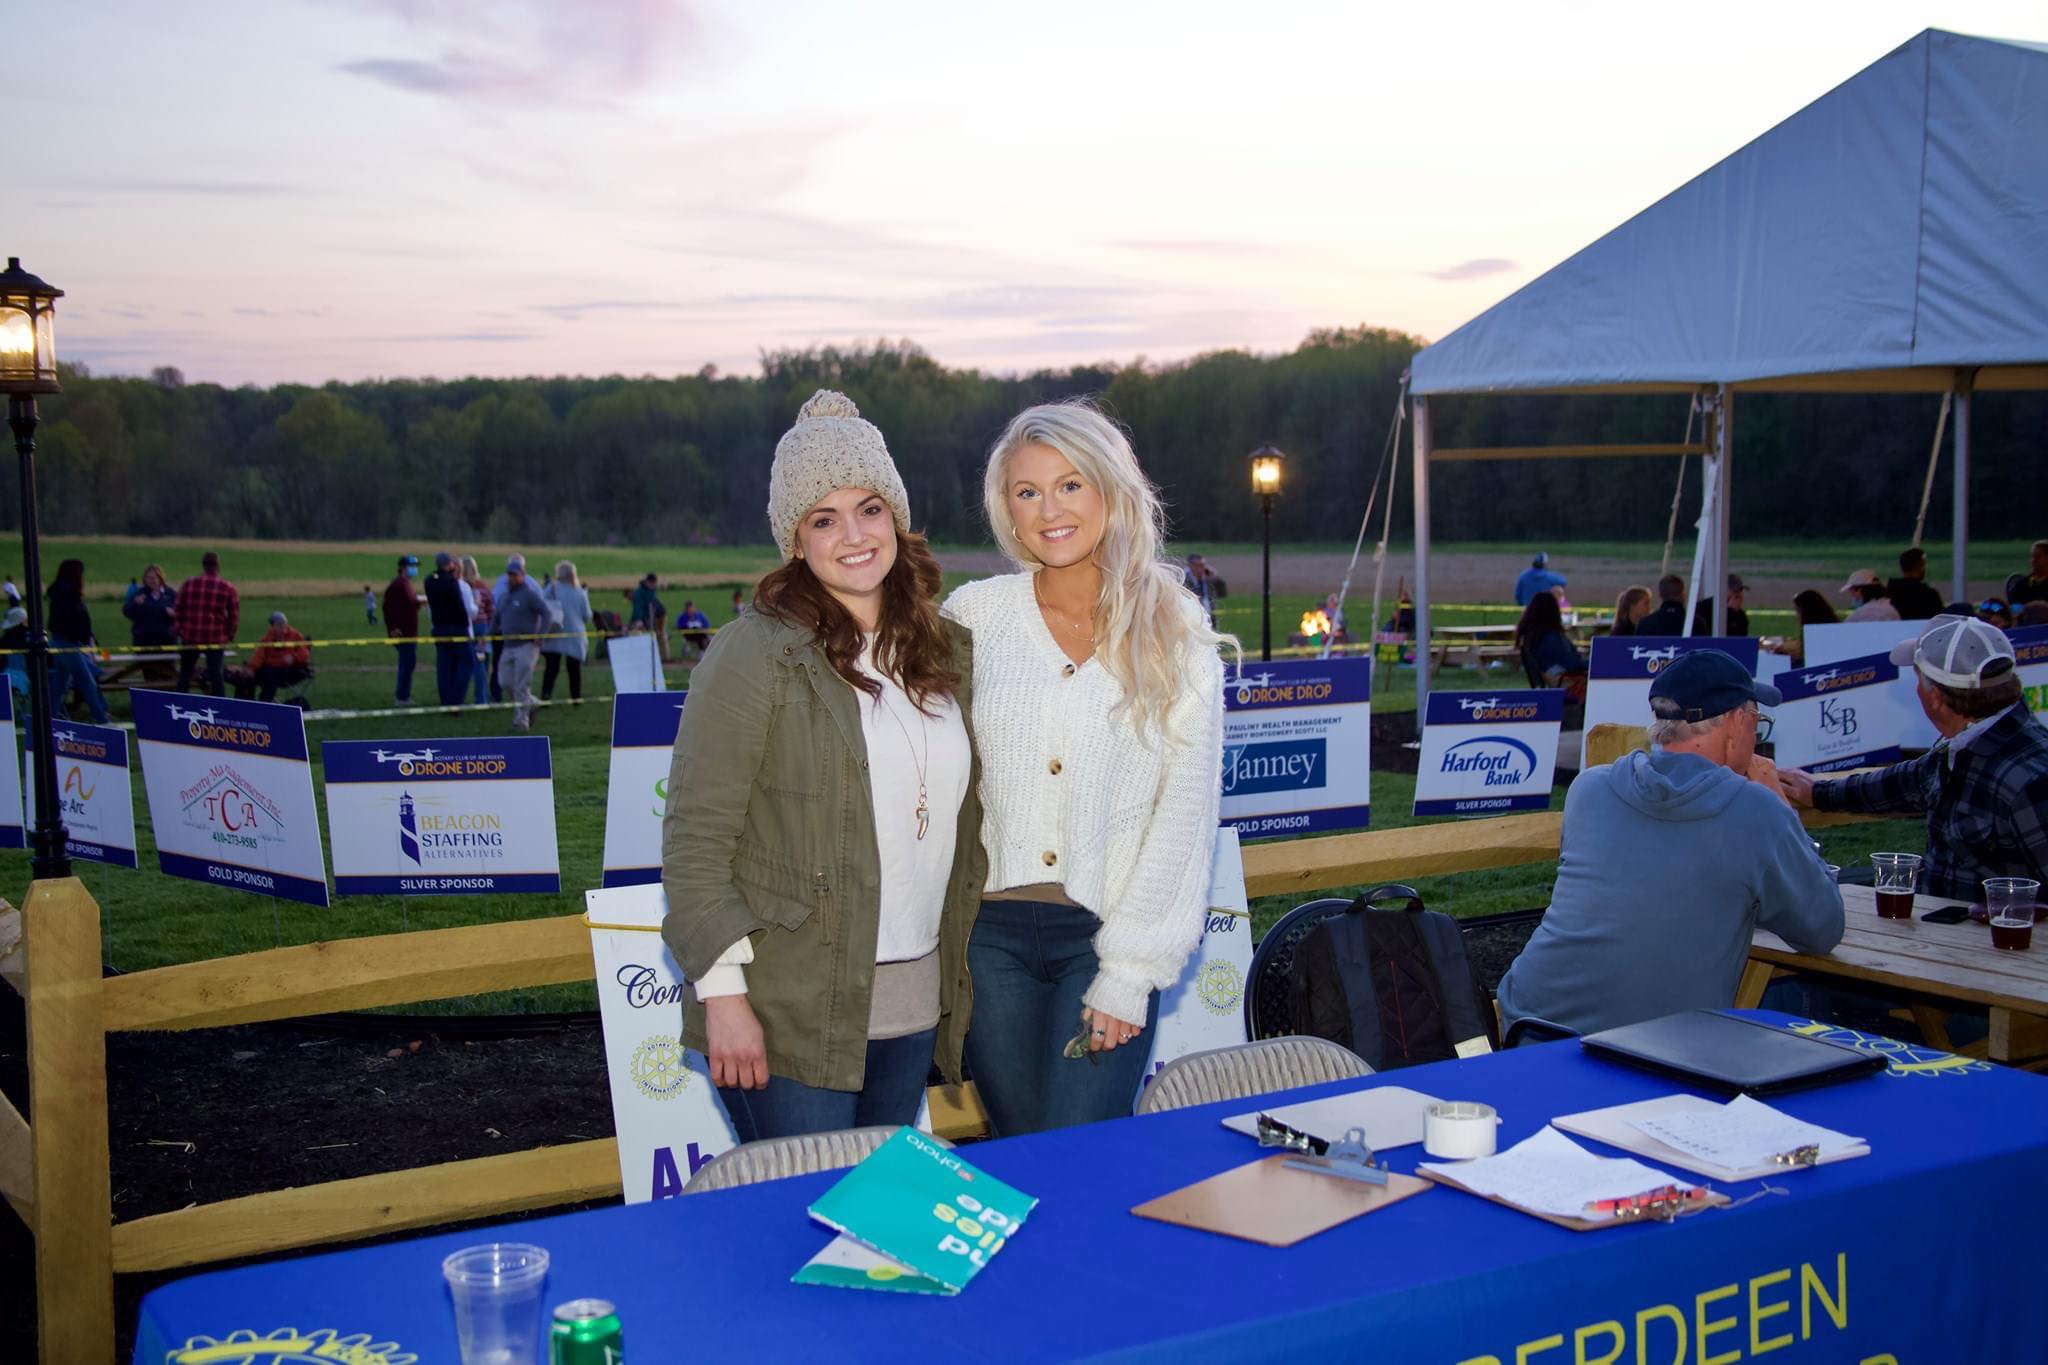 SURVICE employees, Melissa and Tori, helping at the event